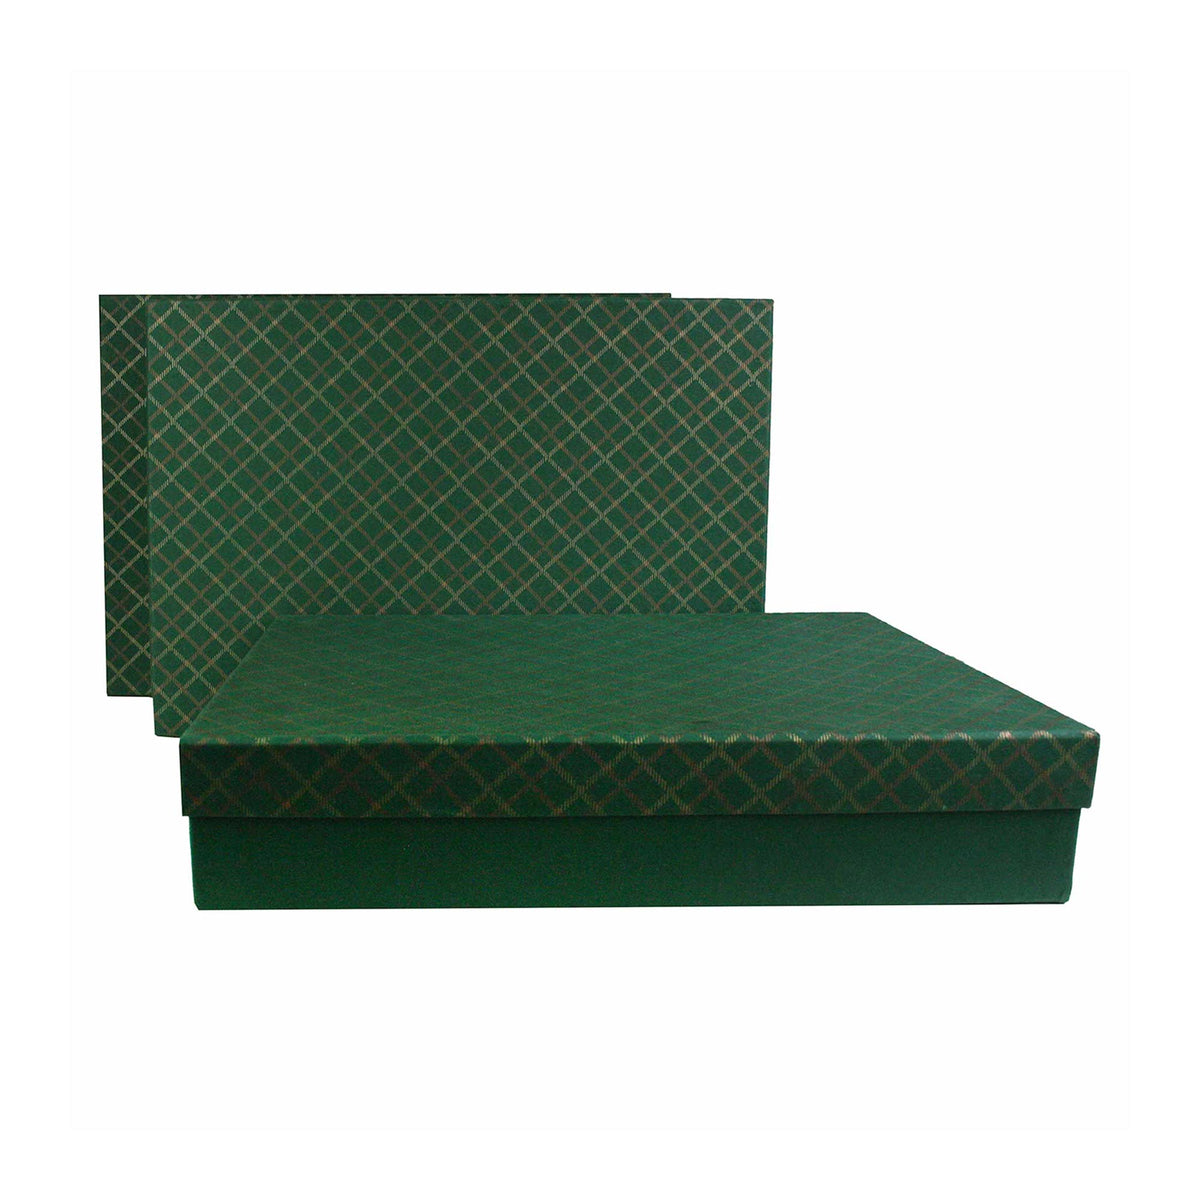 Set of 3 Handmade Green Chequered Gift Boxes (Sizes Available)